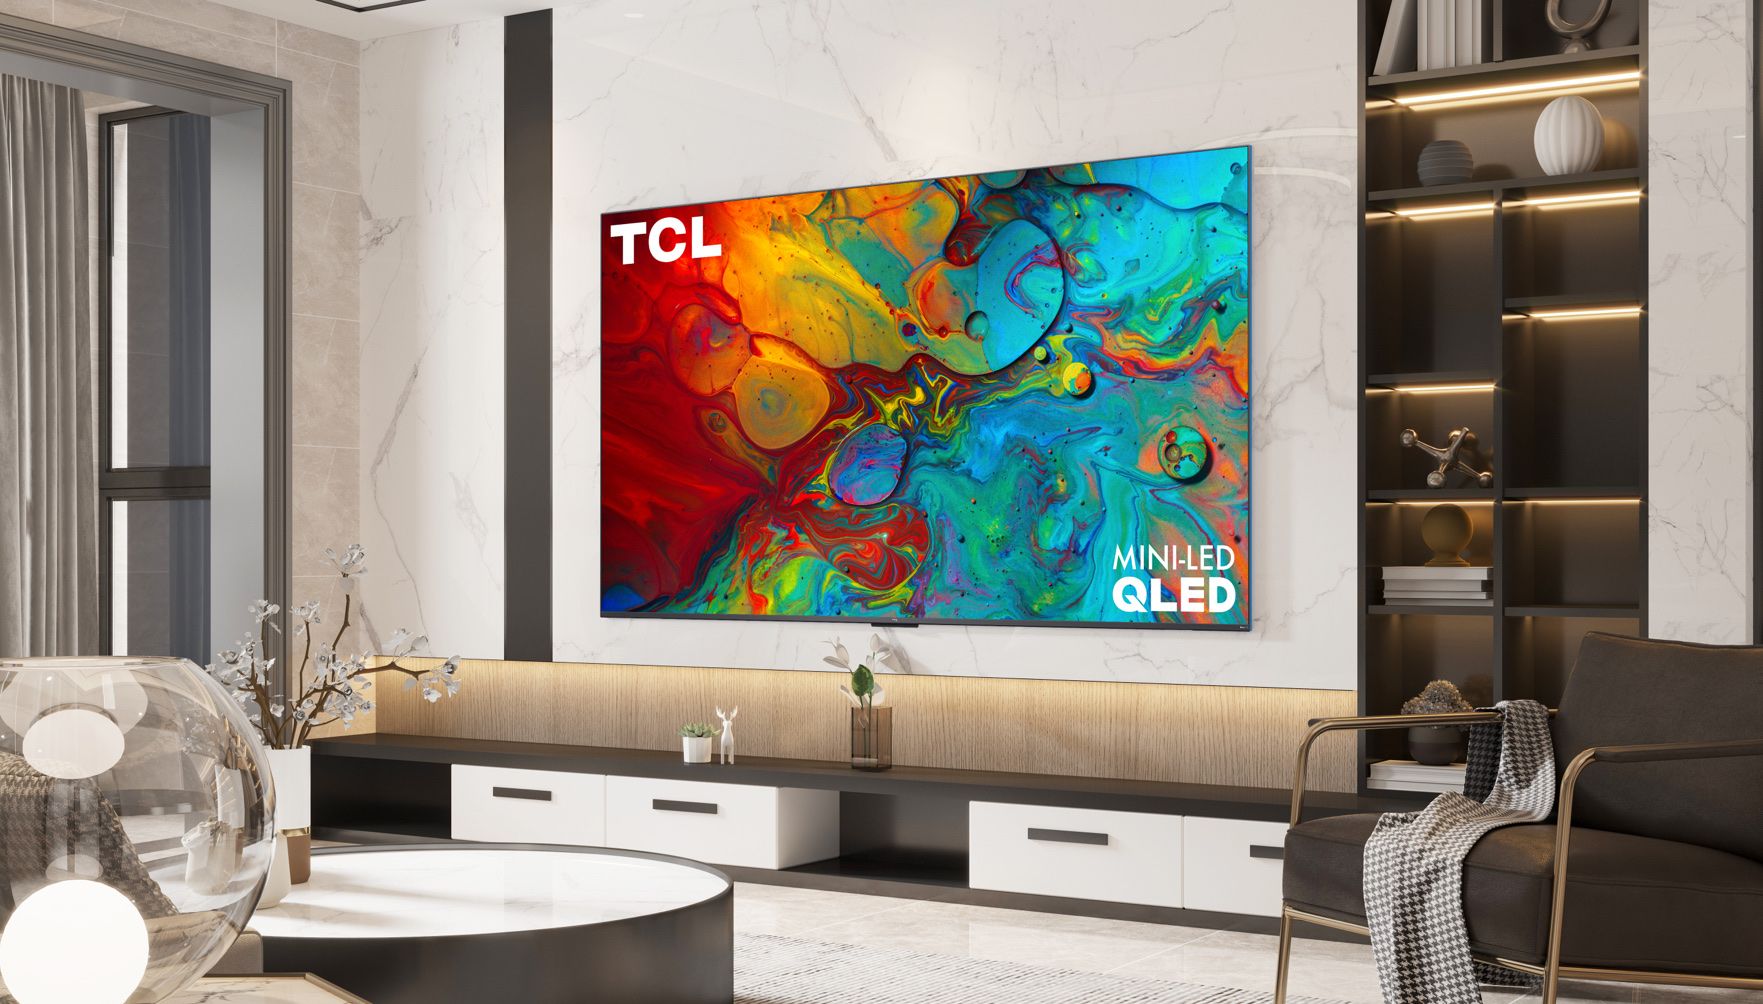 TCL’s 6-Series 8K Smart TV is currently 30 percent off